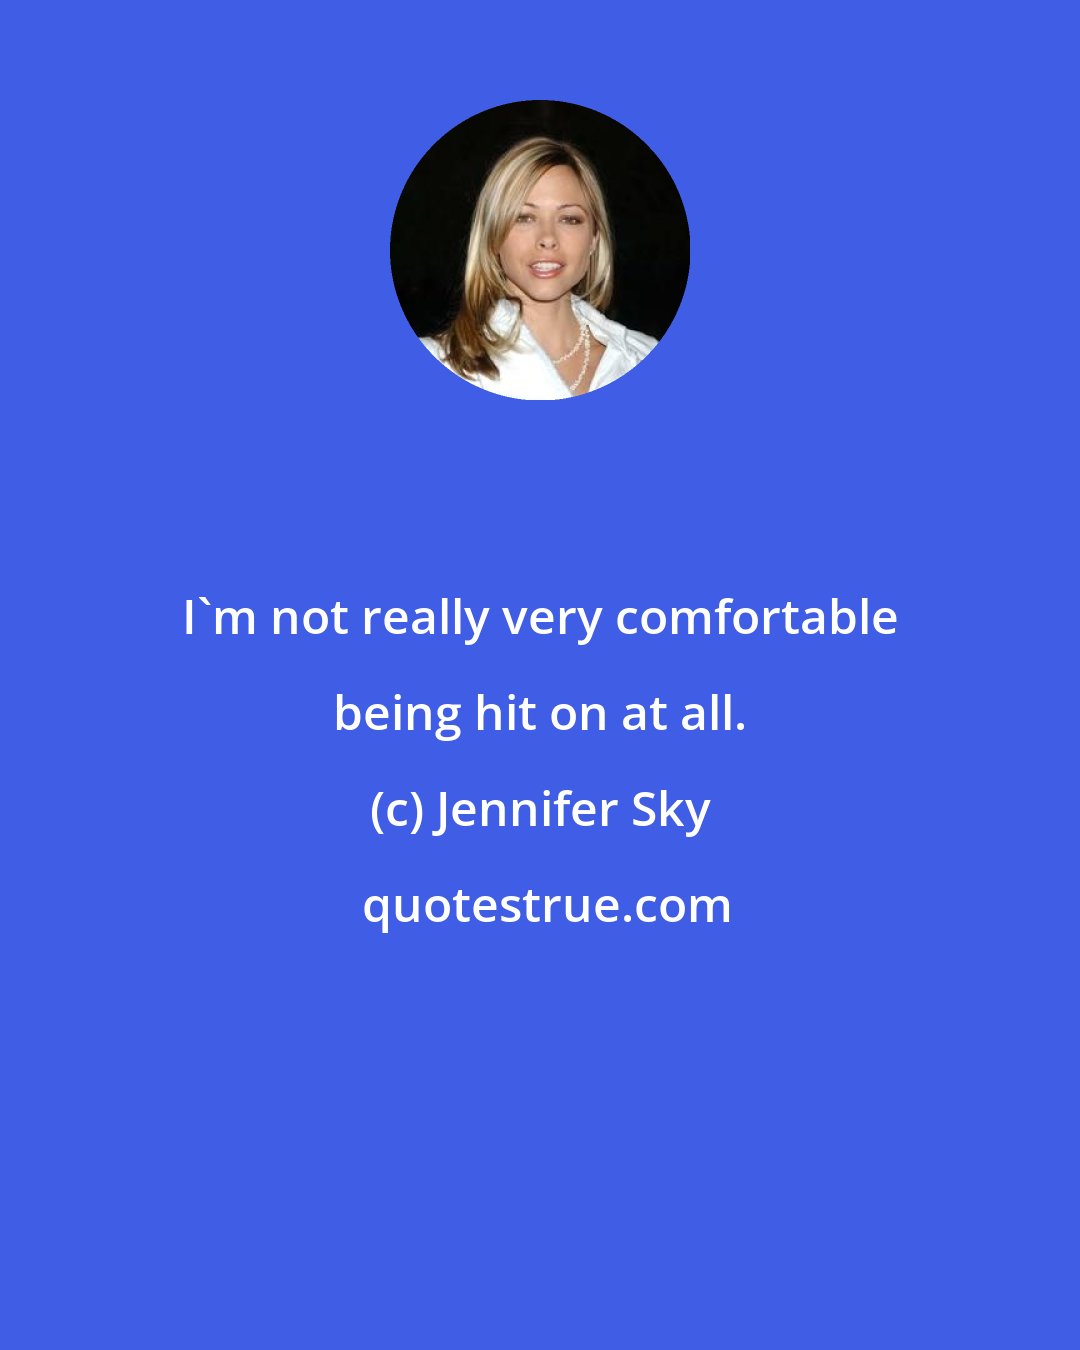 Jennifer Sky: I'm not really very comfortable being hit on at all.